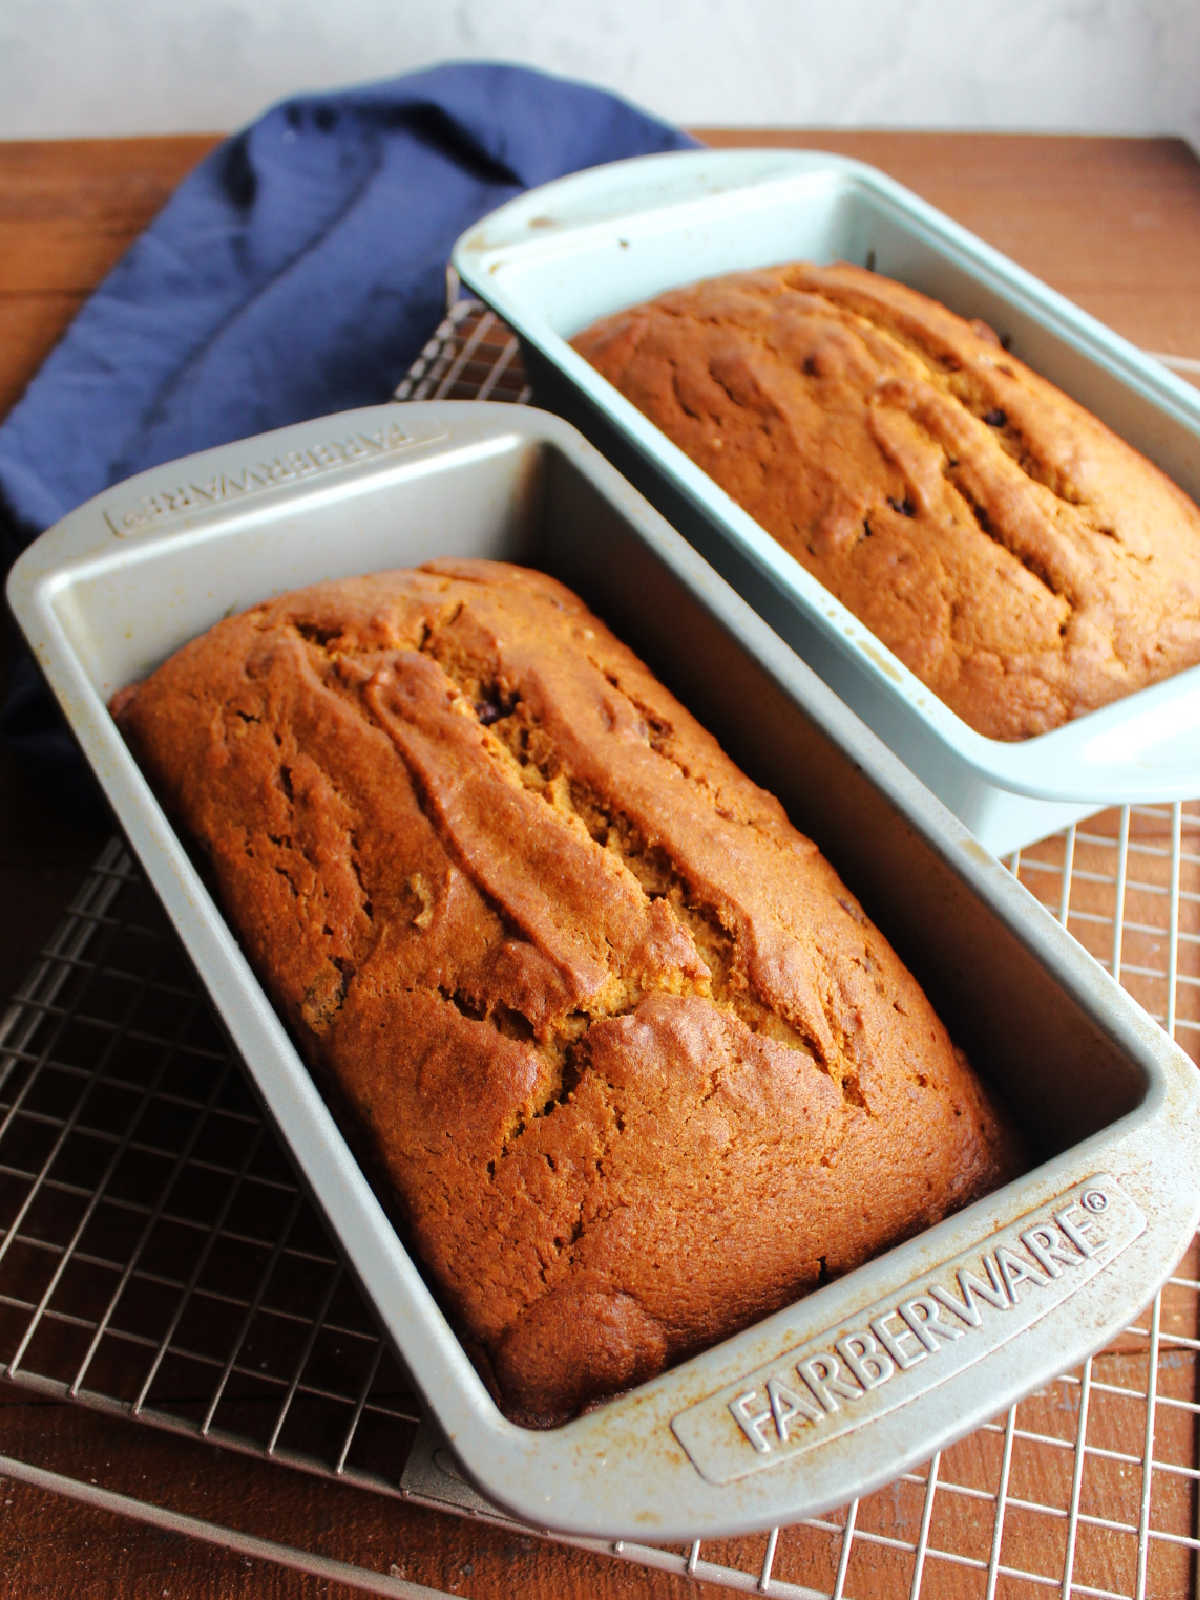 Freshly baked loaves of pumpkin bread with chocolate chips.